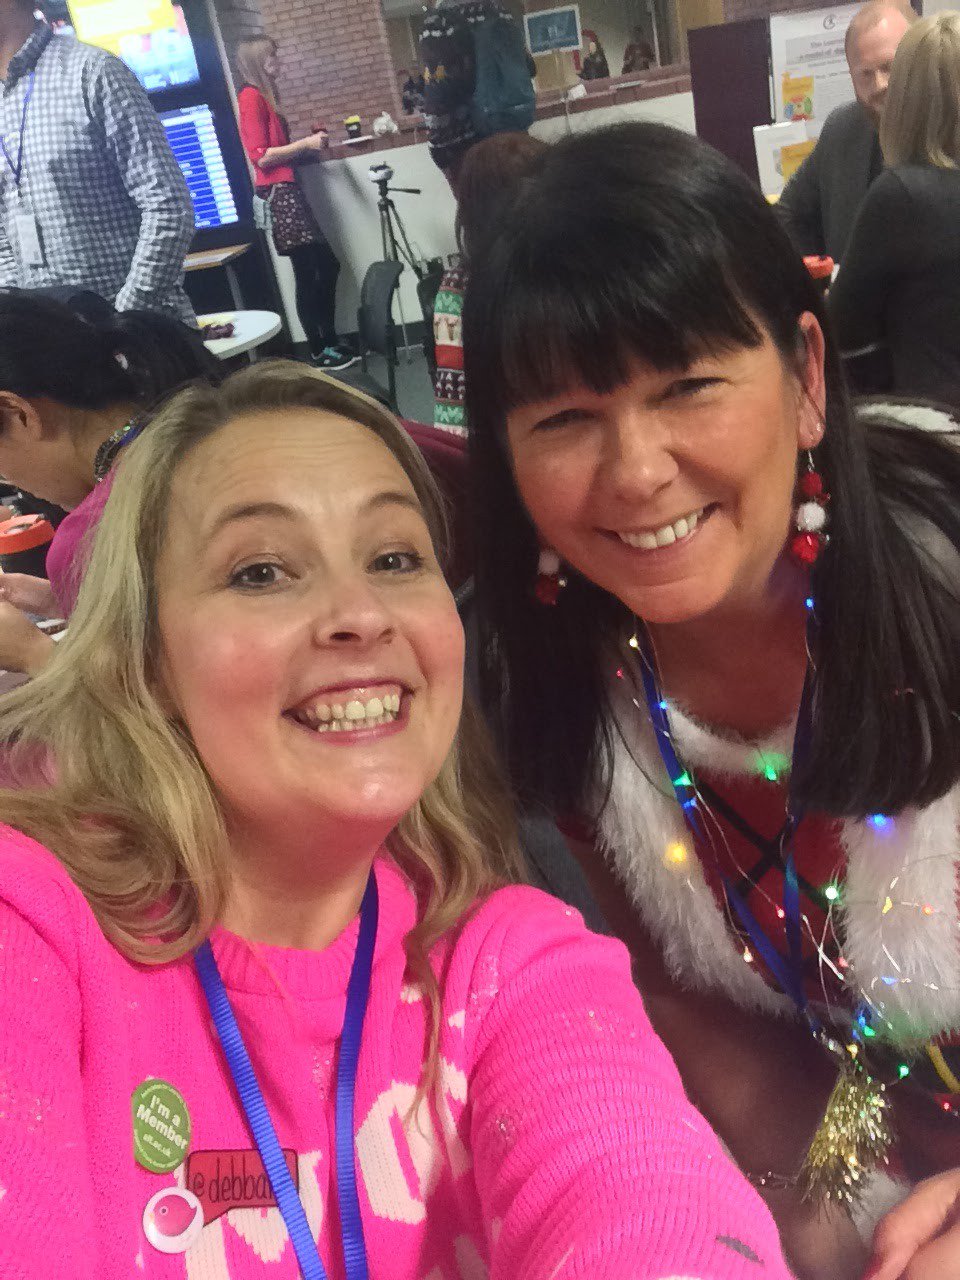 @alexgspiers aww enjoy Alex - keep the tweets coming ! I had such a fab time last year with my lovely pal the fabulous @suebecks ... gutted can't be there this year so will follow keenly on twitter ! Looking forward to seeing if there are festive jumpers a-happening this year ! #SocMedHE17 https://t.co/lqpS8TqJHq